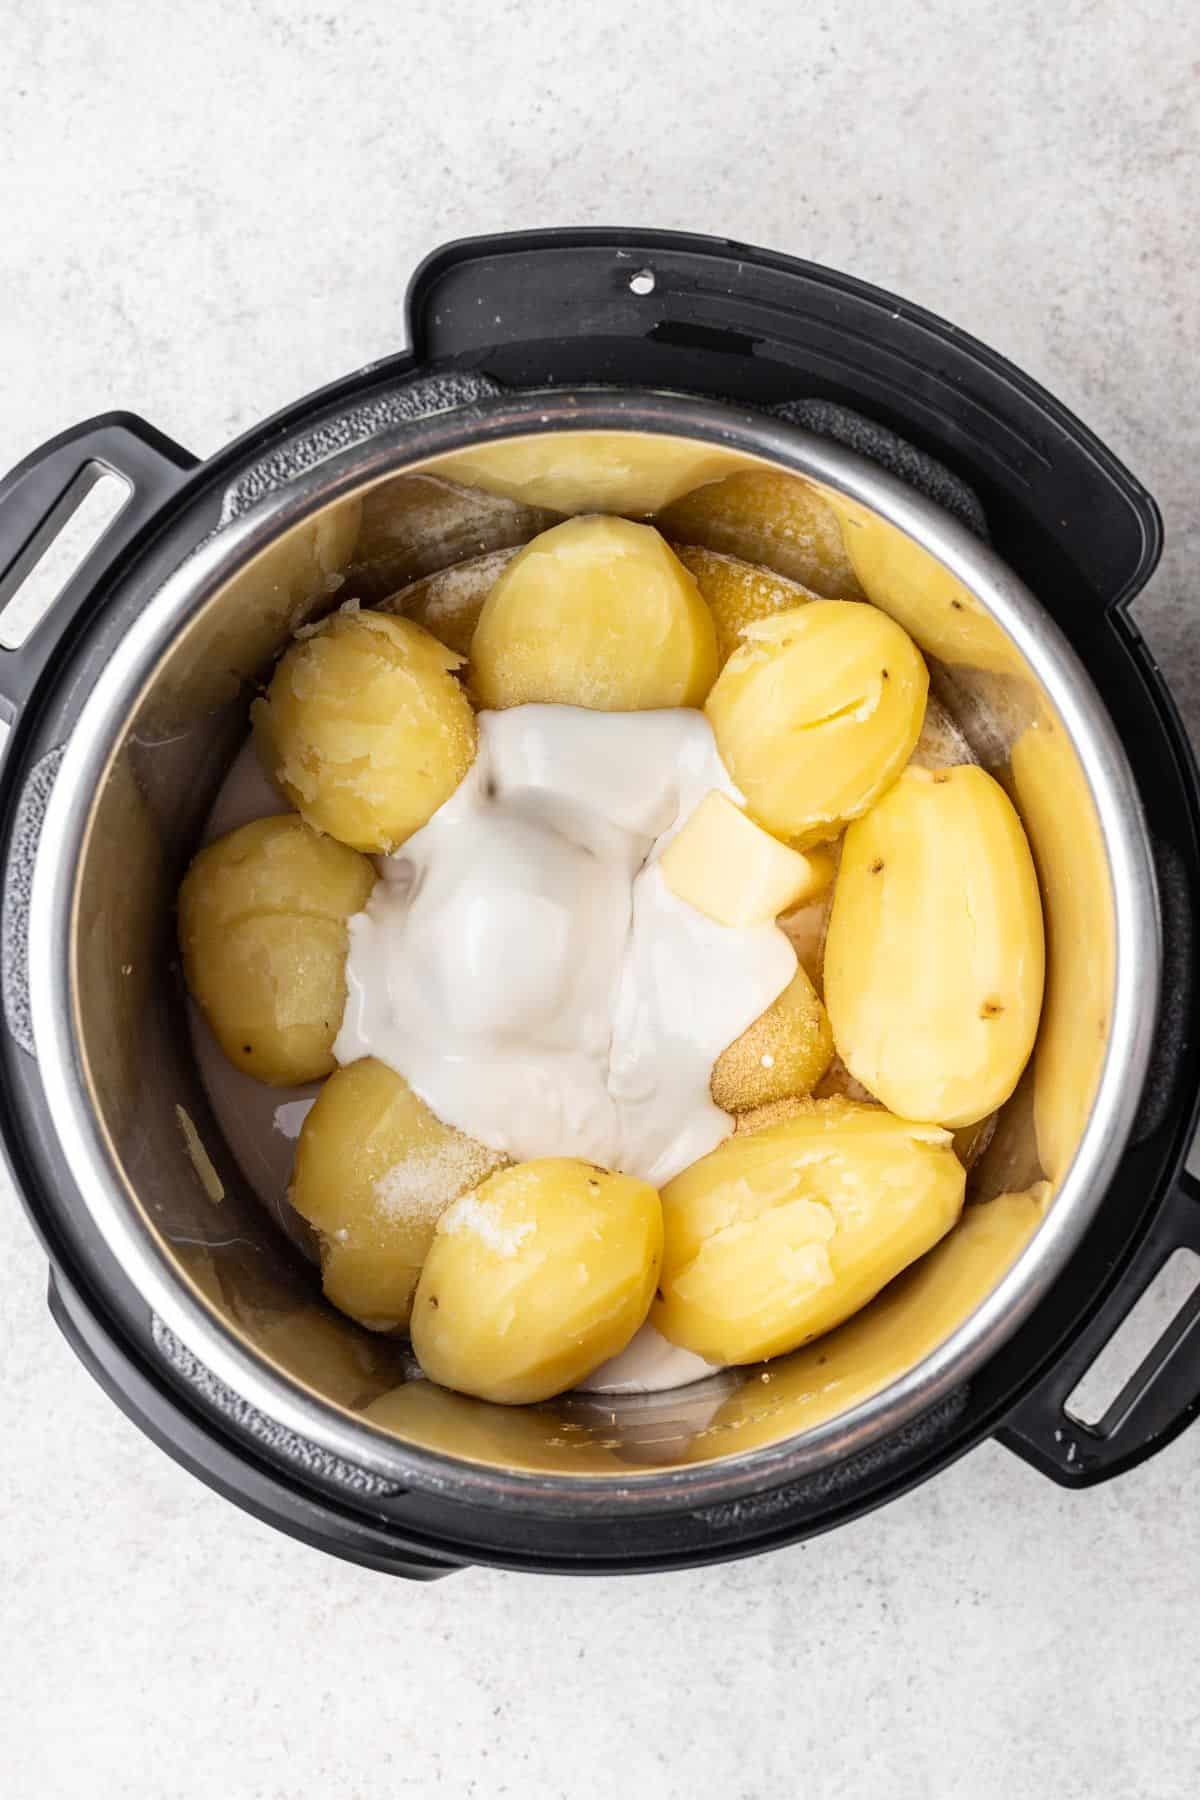 Potatoes after cooking with sour cream, butter, and seasonings.